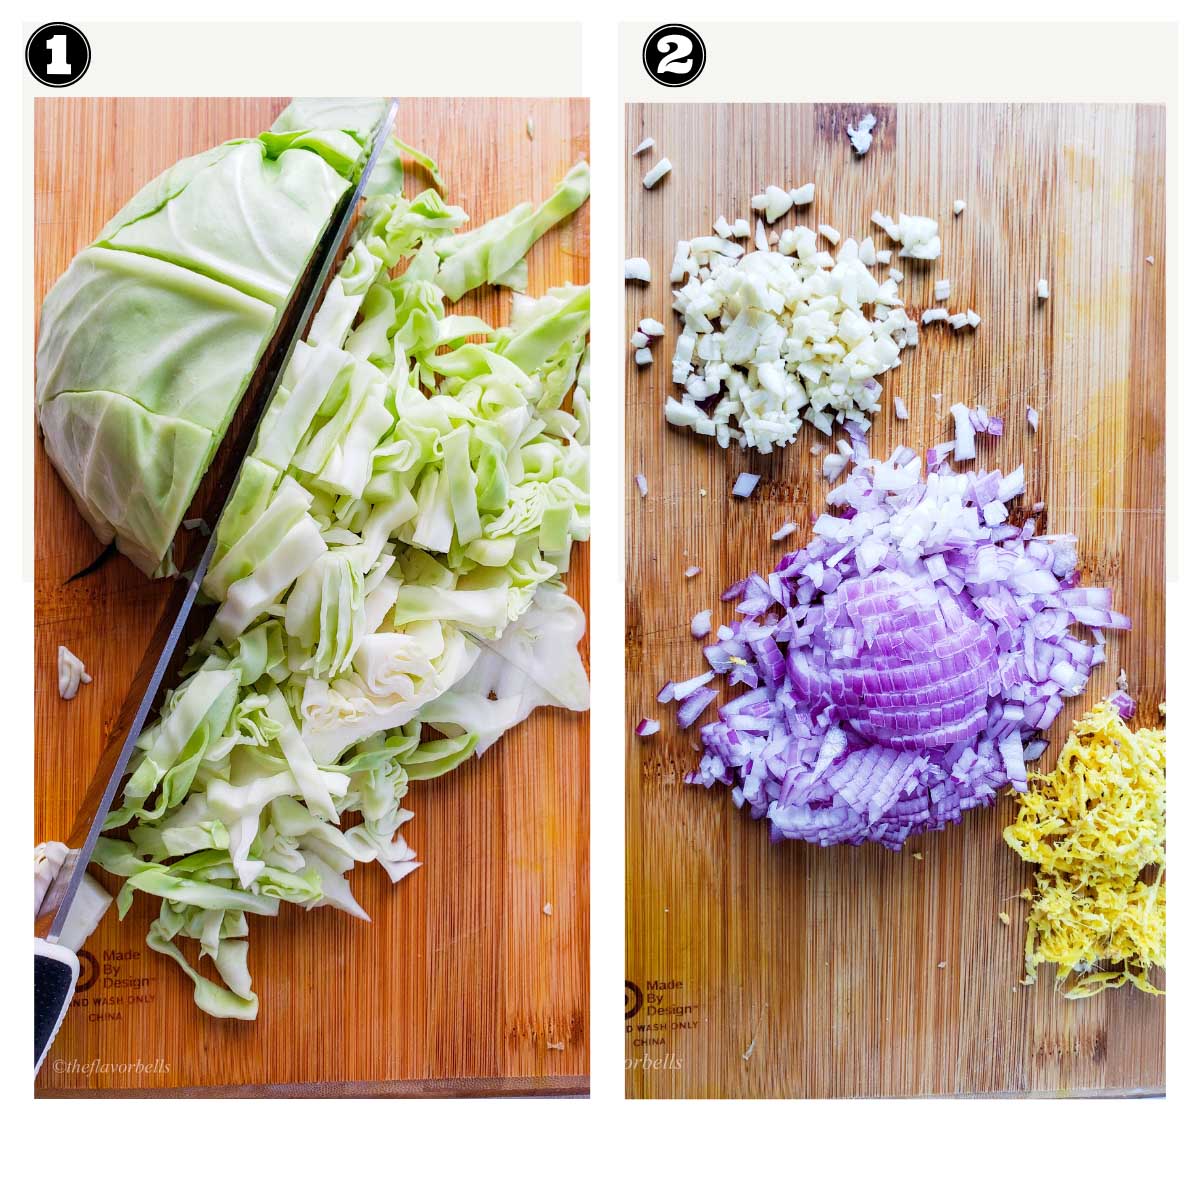 Images showing preparations like chopping onions, cabbage etc